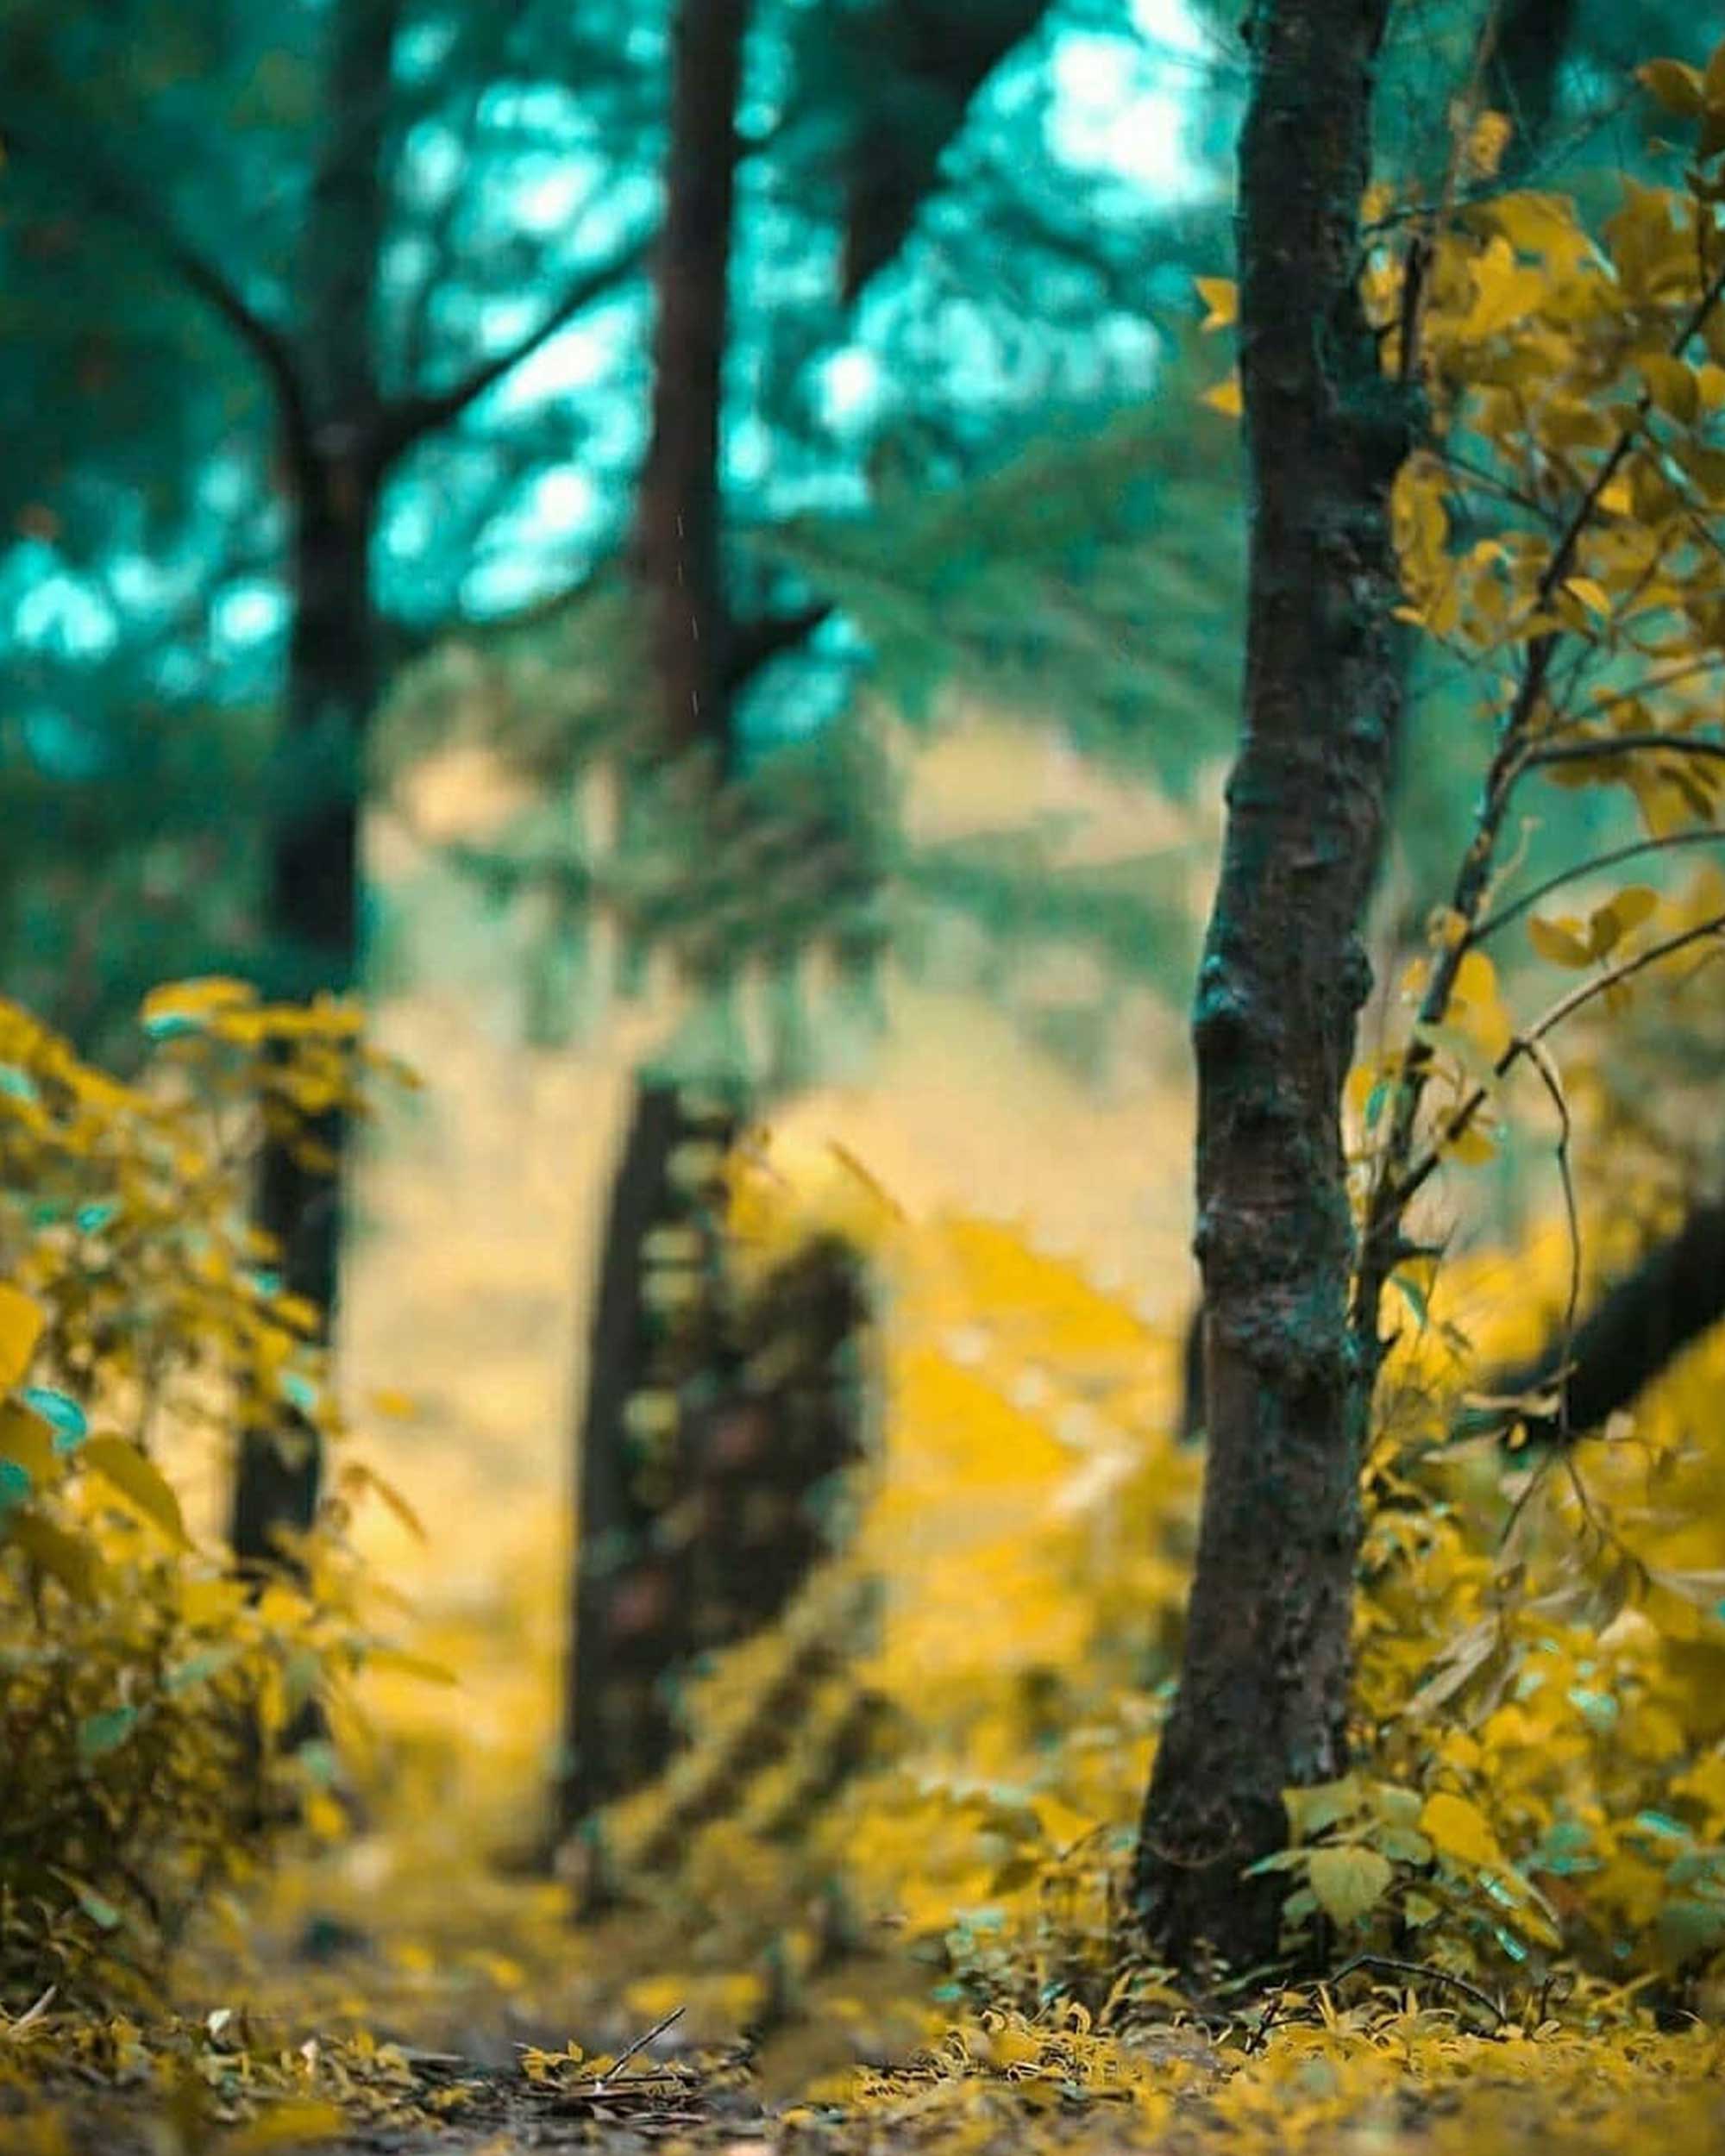 Forest Blur PicsArt Background Free Stock Image